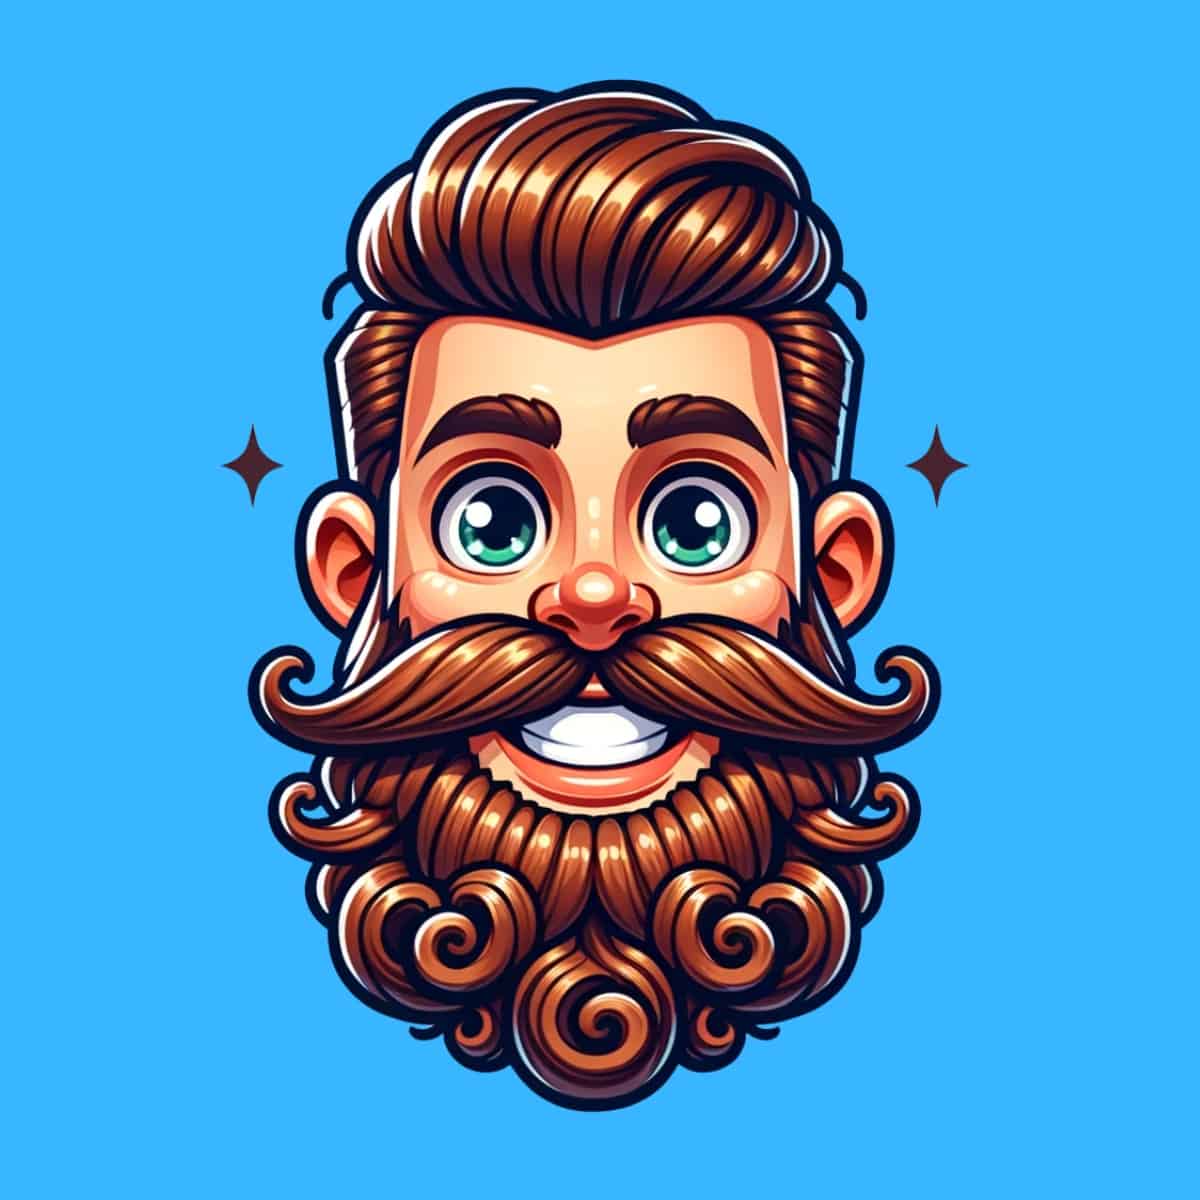 A cartoon graphic of a man with a fancy, elaborately styled beard on a blue background.